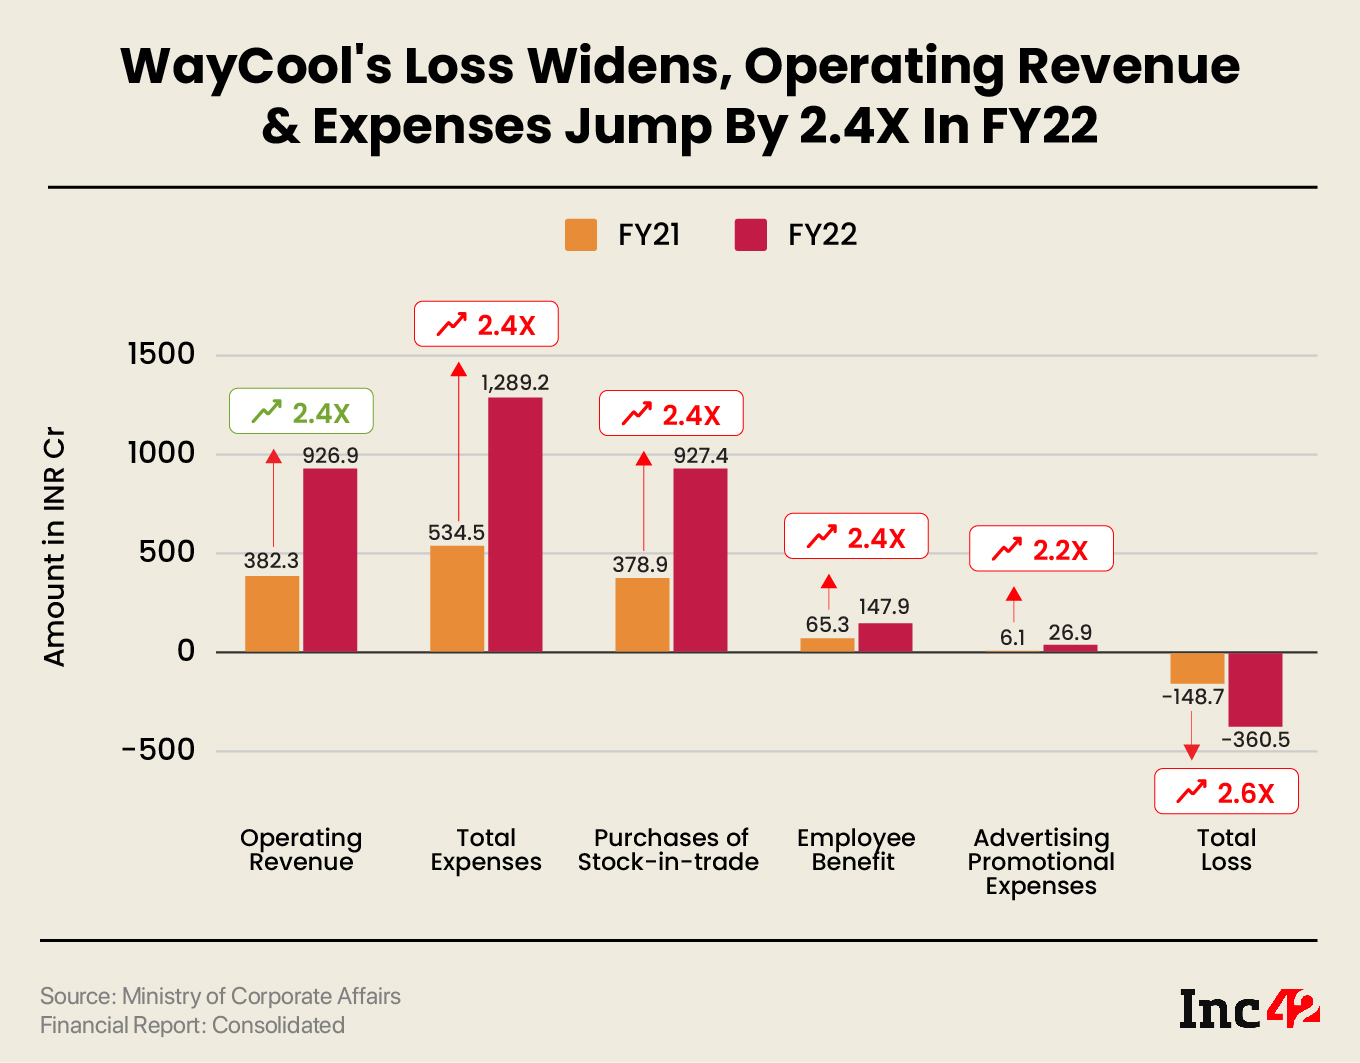 WayCool's Loss Widens, Operating Revenue & Expenses Jump By 2.4X In FY22